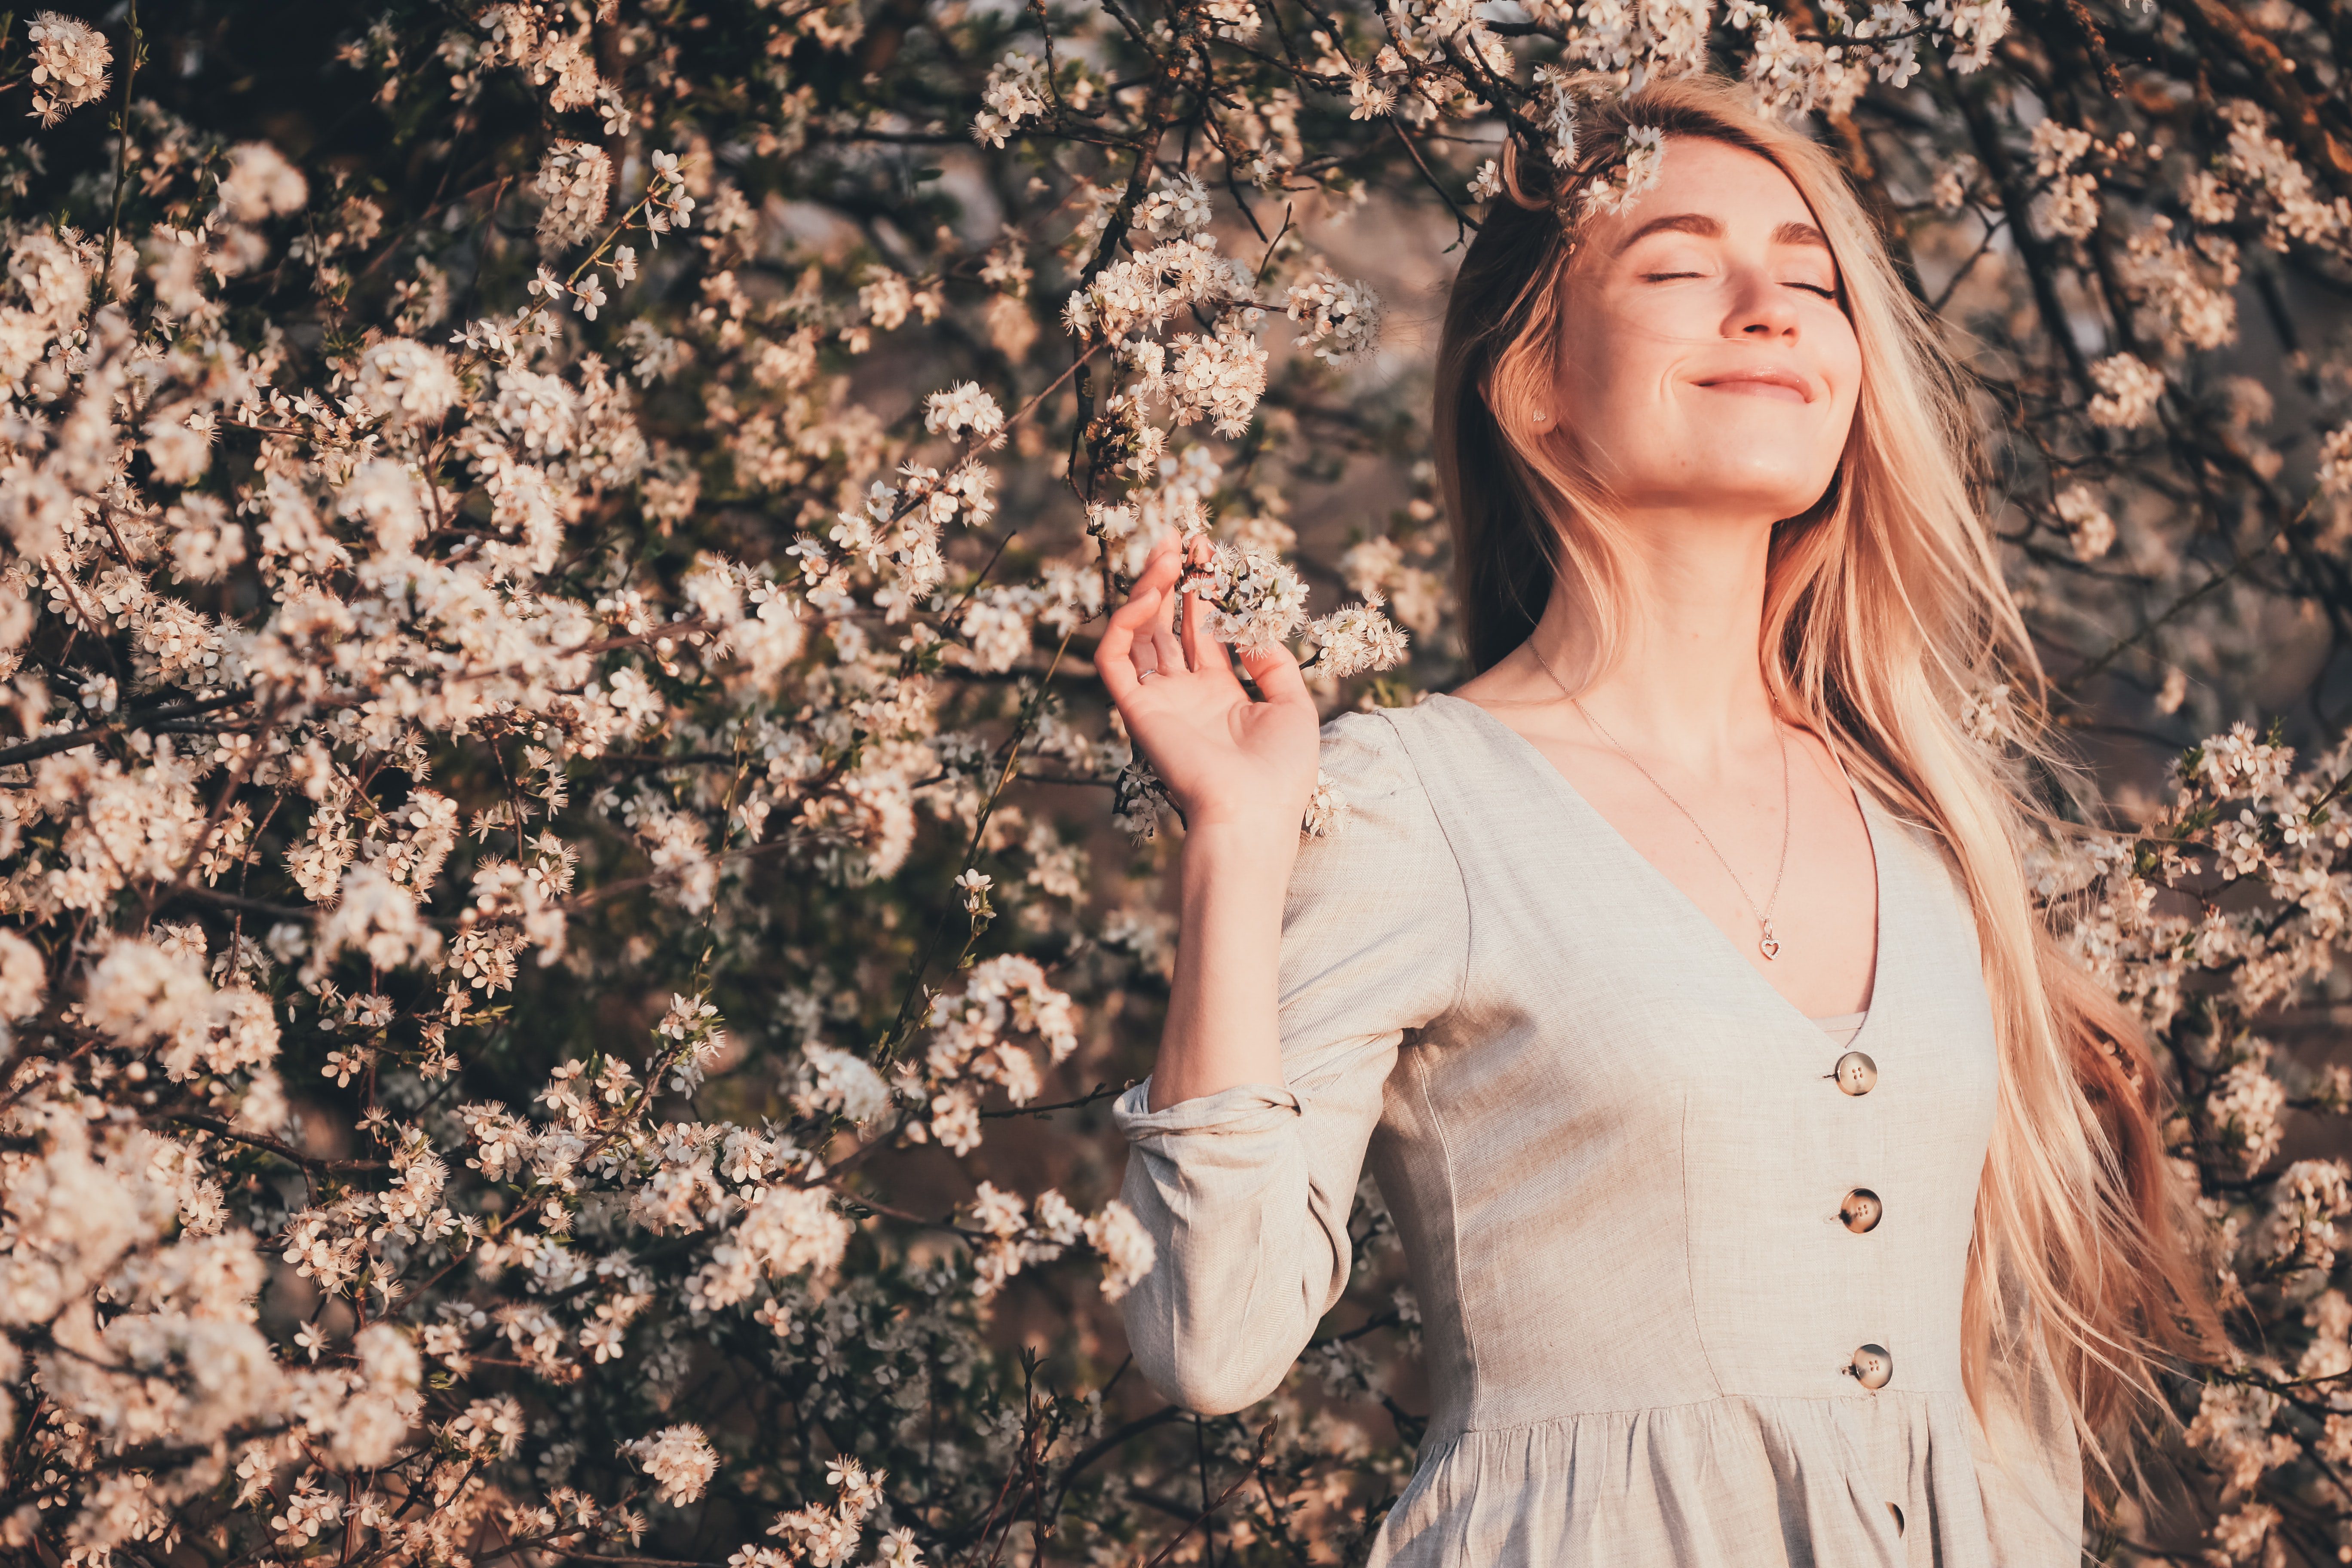 3 Simple Breathing Exercises to Reduce Stress